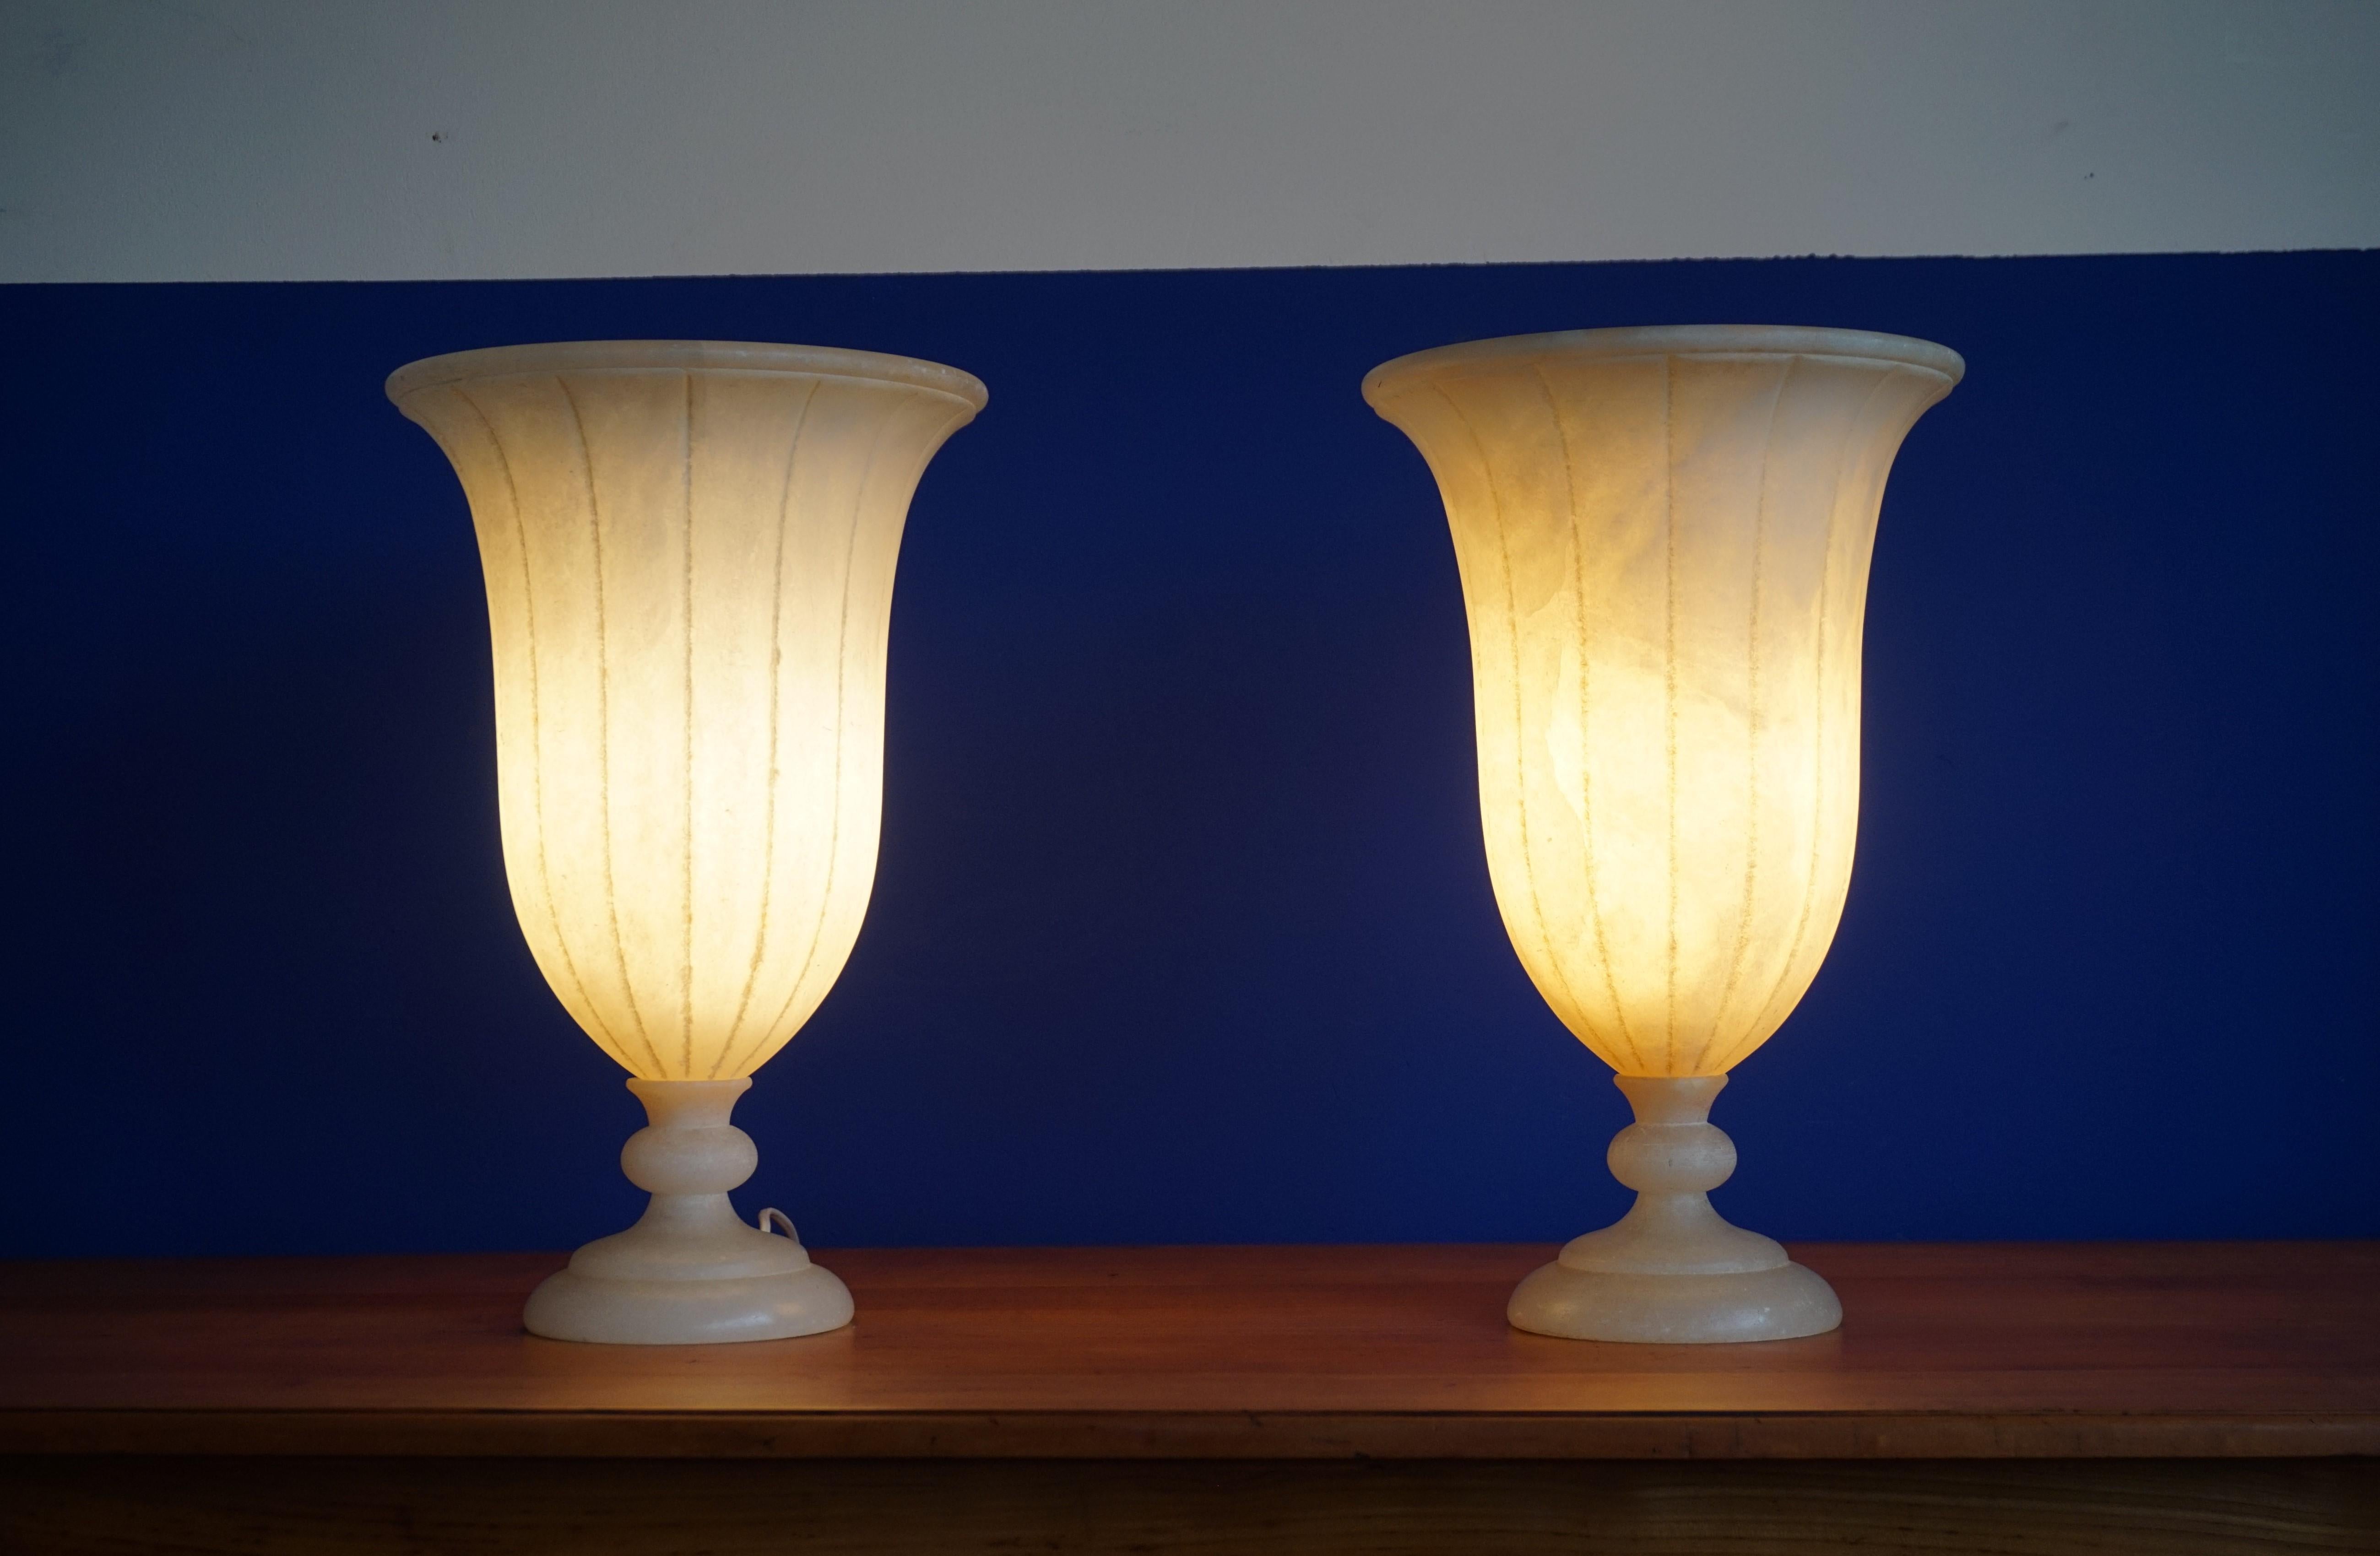 Good size and beautiful atmosphere creating table lights.

This rare pair of handcrafted, mineral stone table lamps is another one of our recent great finds. With their size and timeless design these alabaster lamps are an absolute joy to own and